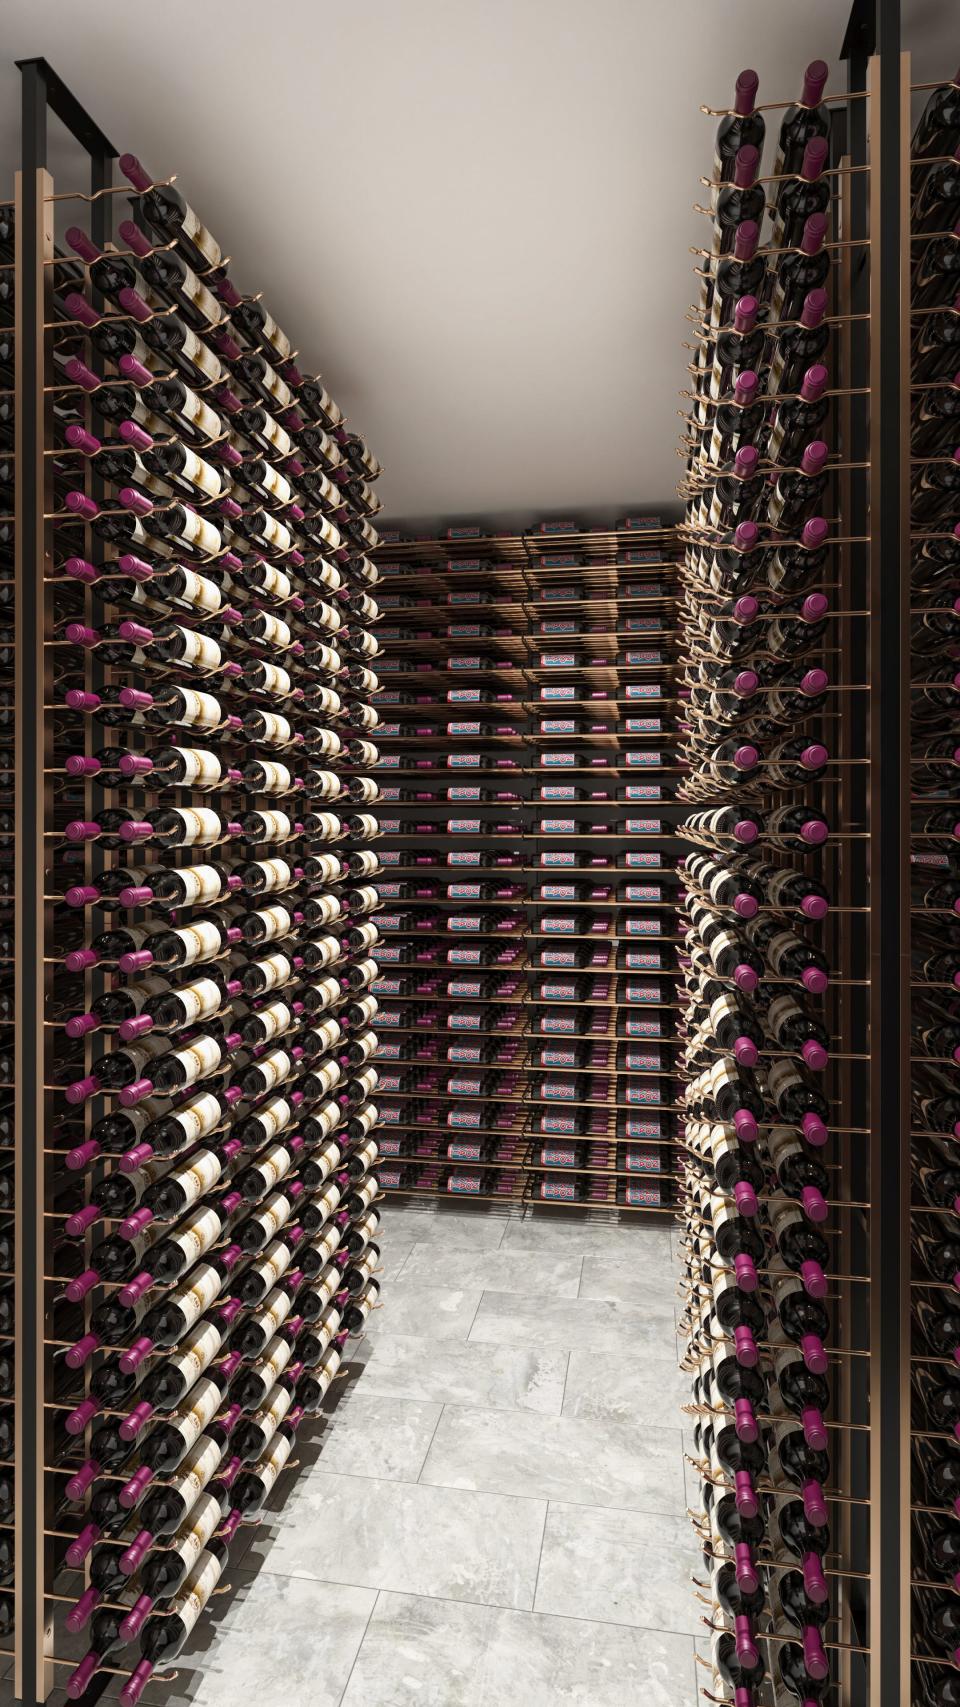 The wine room at Oak Park plans to house 7,000 bottles of wine when it opens this fall.